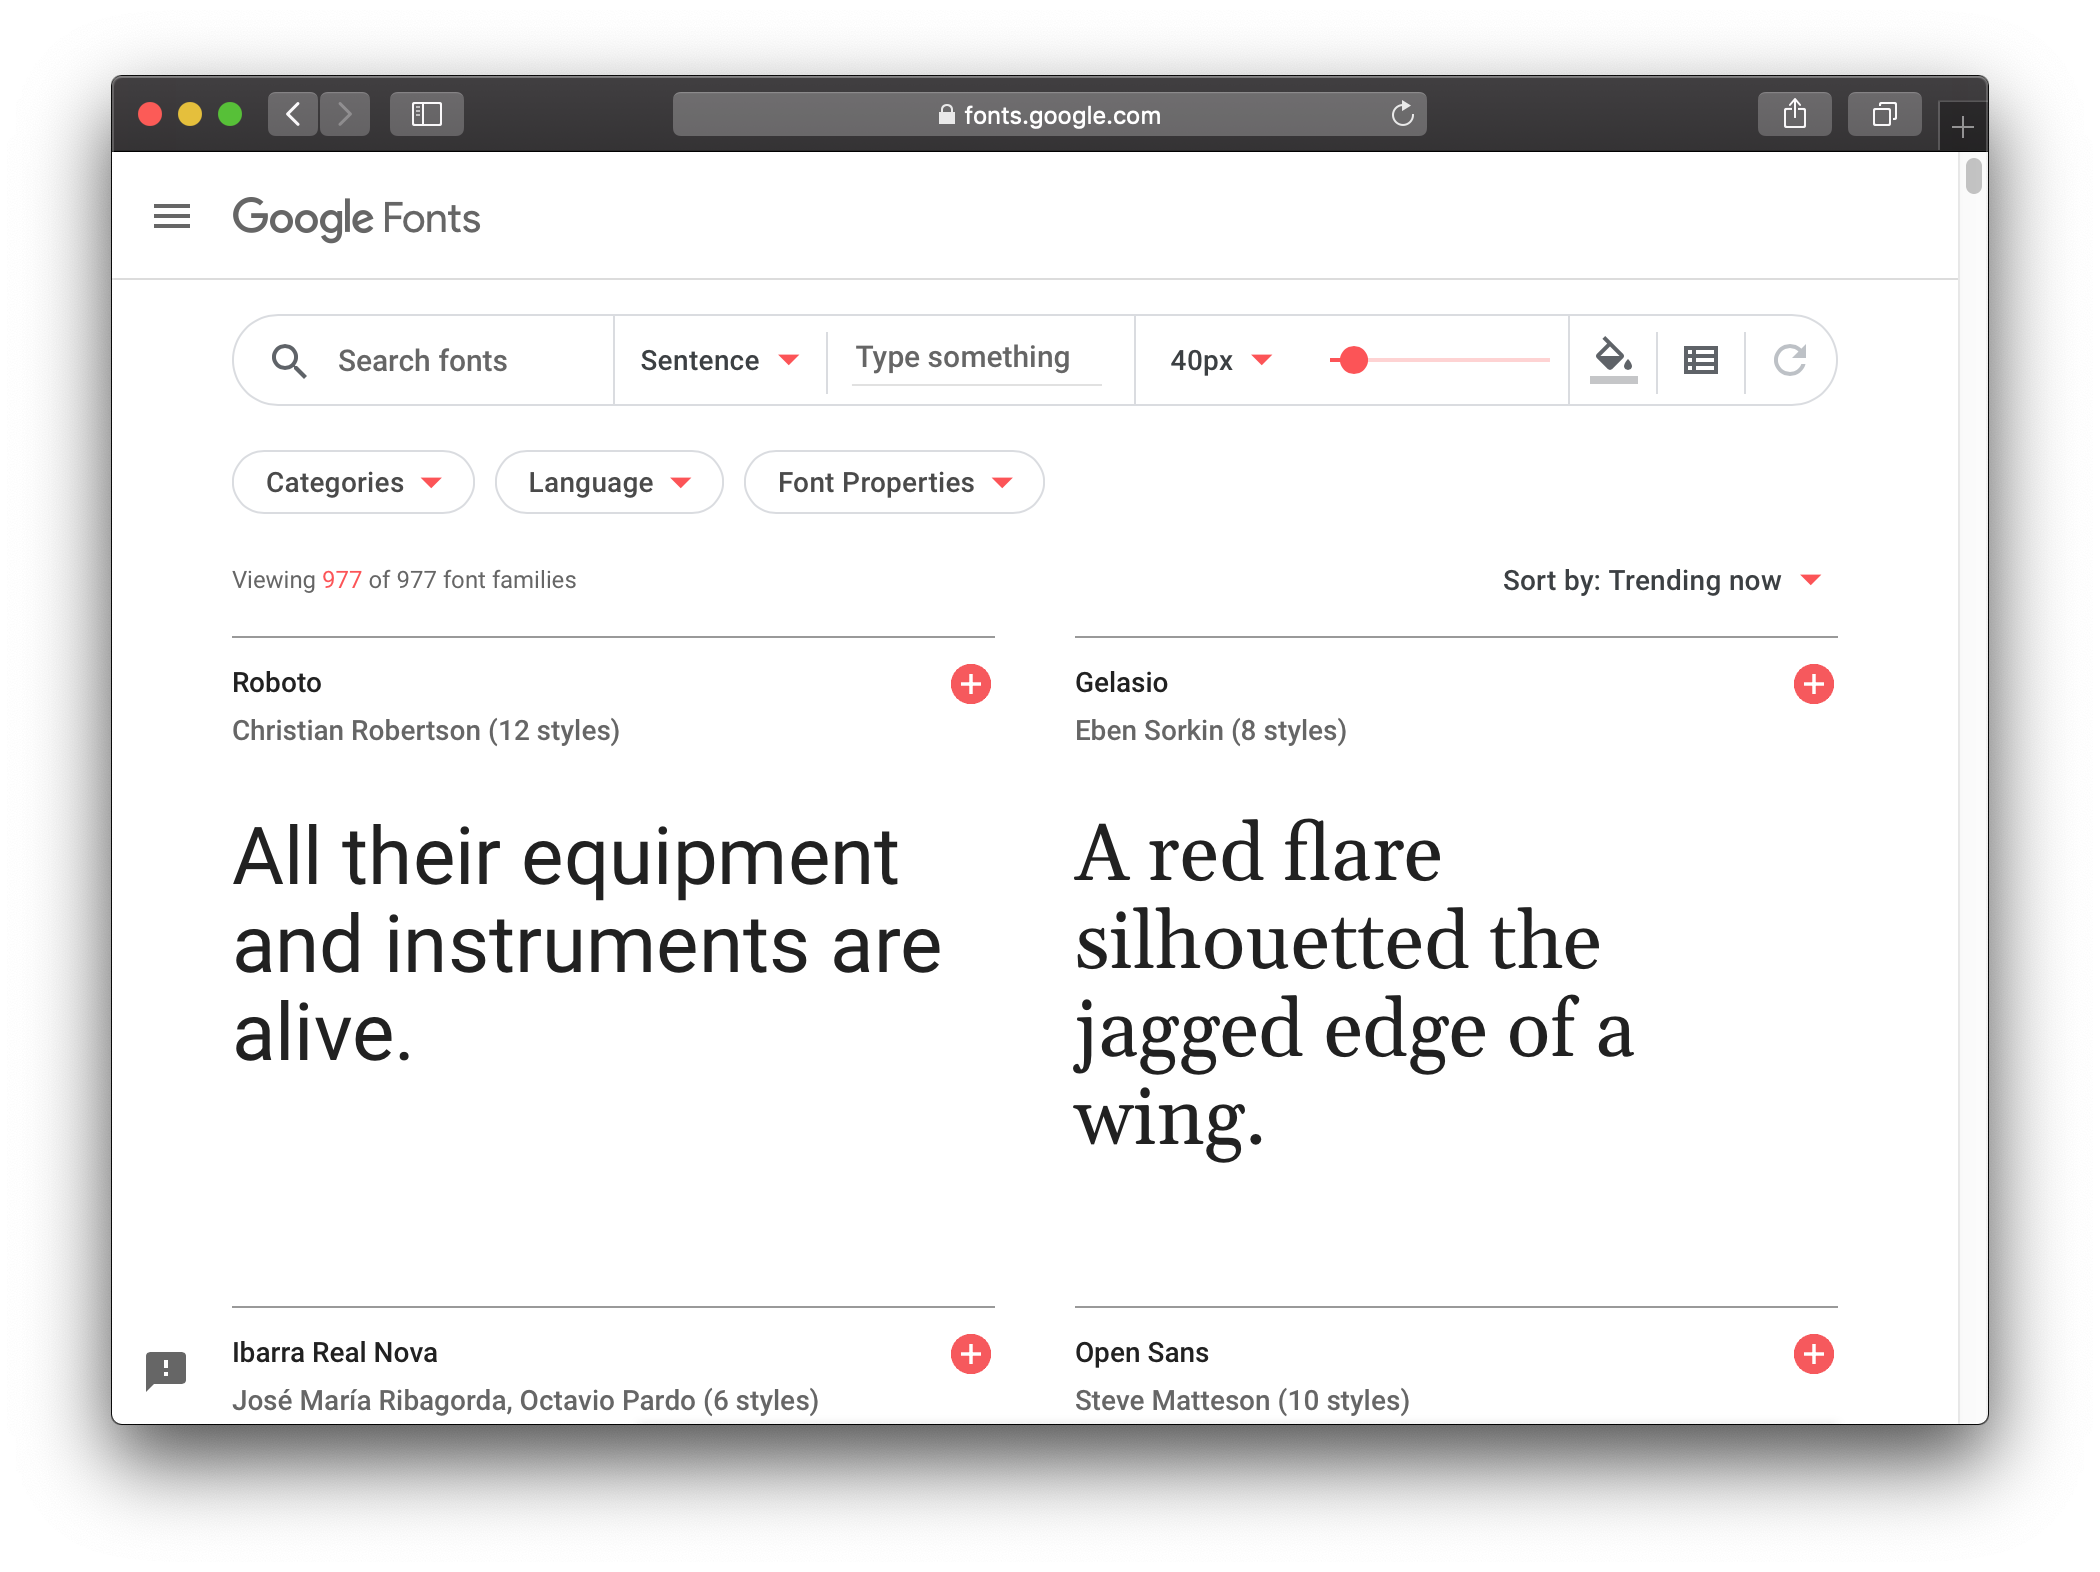 Google Fonts main page showing previews of Roboto and Gelasio fonts.